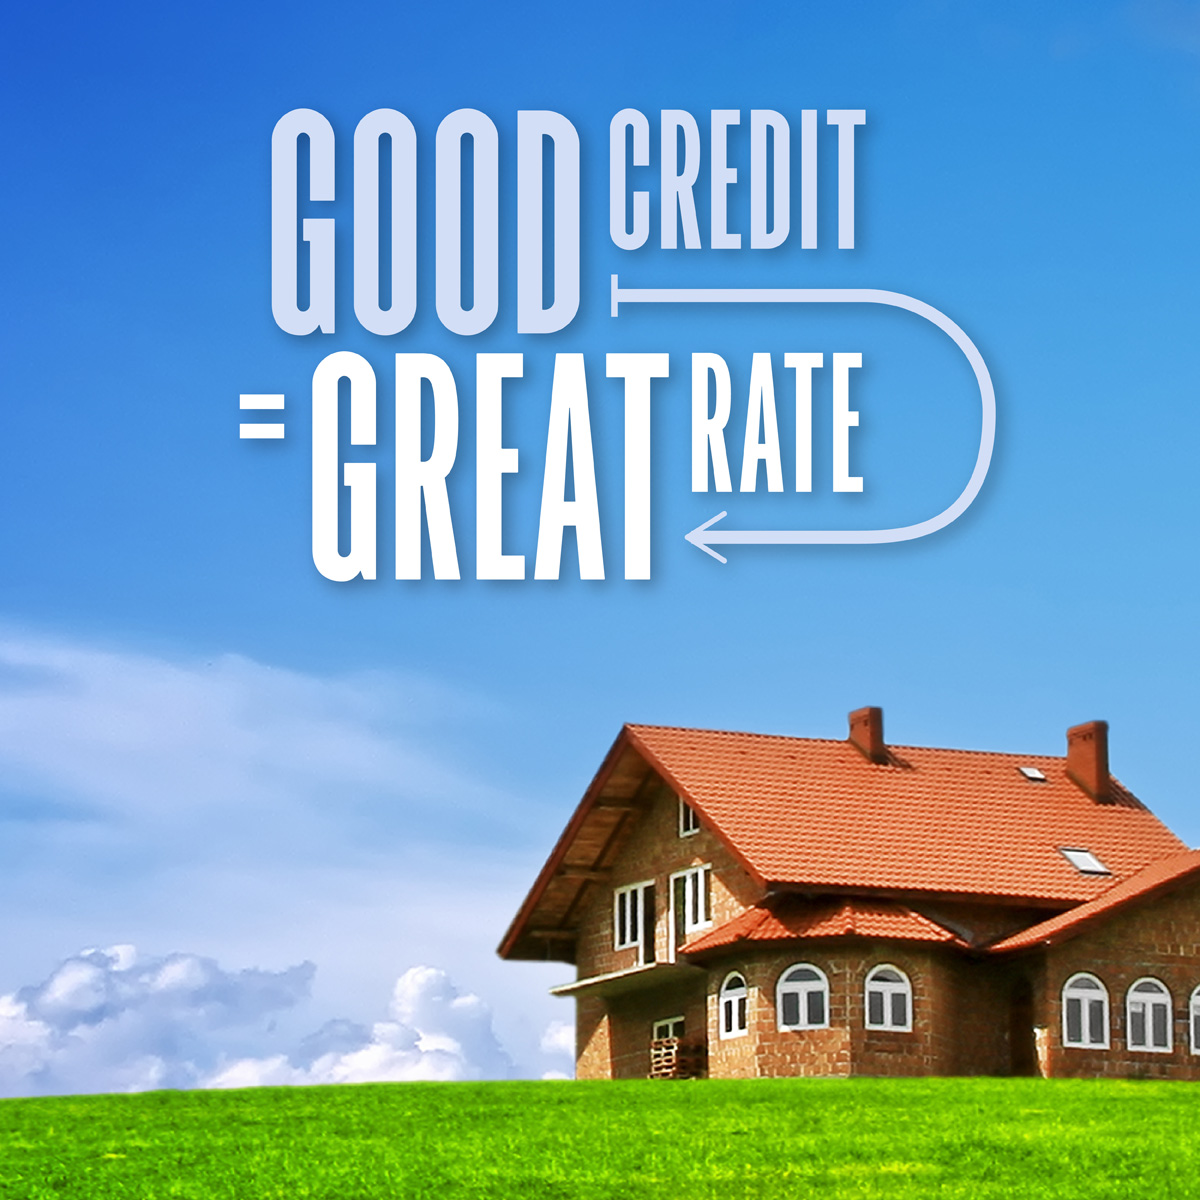 Real Estate Agents — does your USDA buyer have good credit? They deserve a great rate. Call me today to learn more. 
.
.
.
#borrowers #broker #homeownership #Firsttimebuyer #firsttimehomebuyer #FHA #santaclarita #SCV #santaclaritaHomes #scvrealestate #santaclaritarealestate